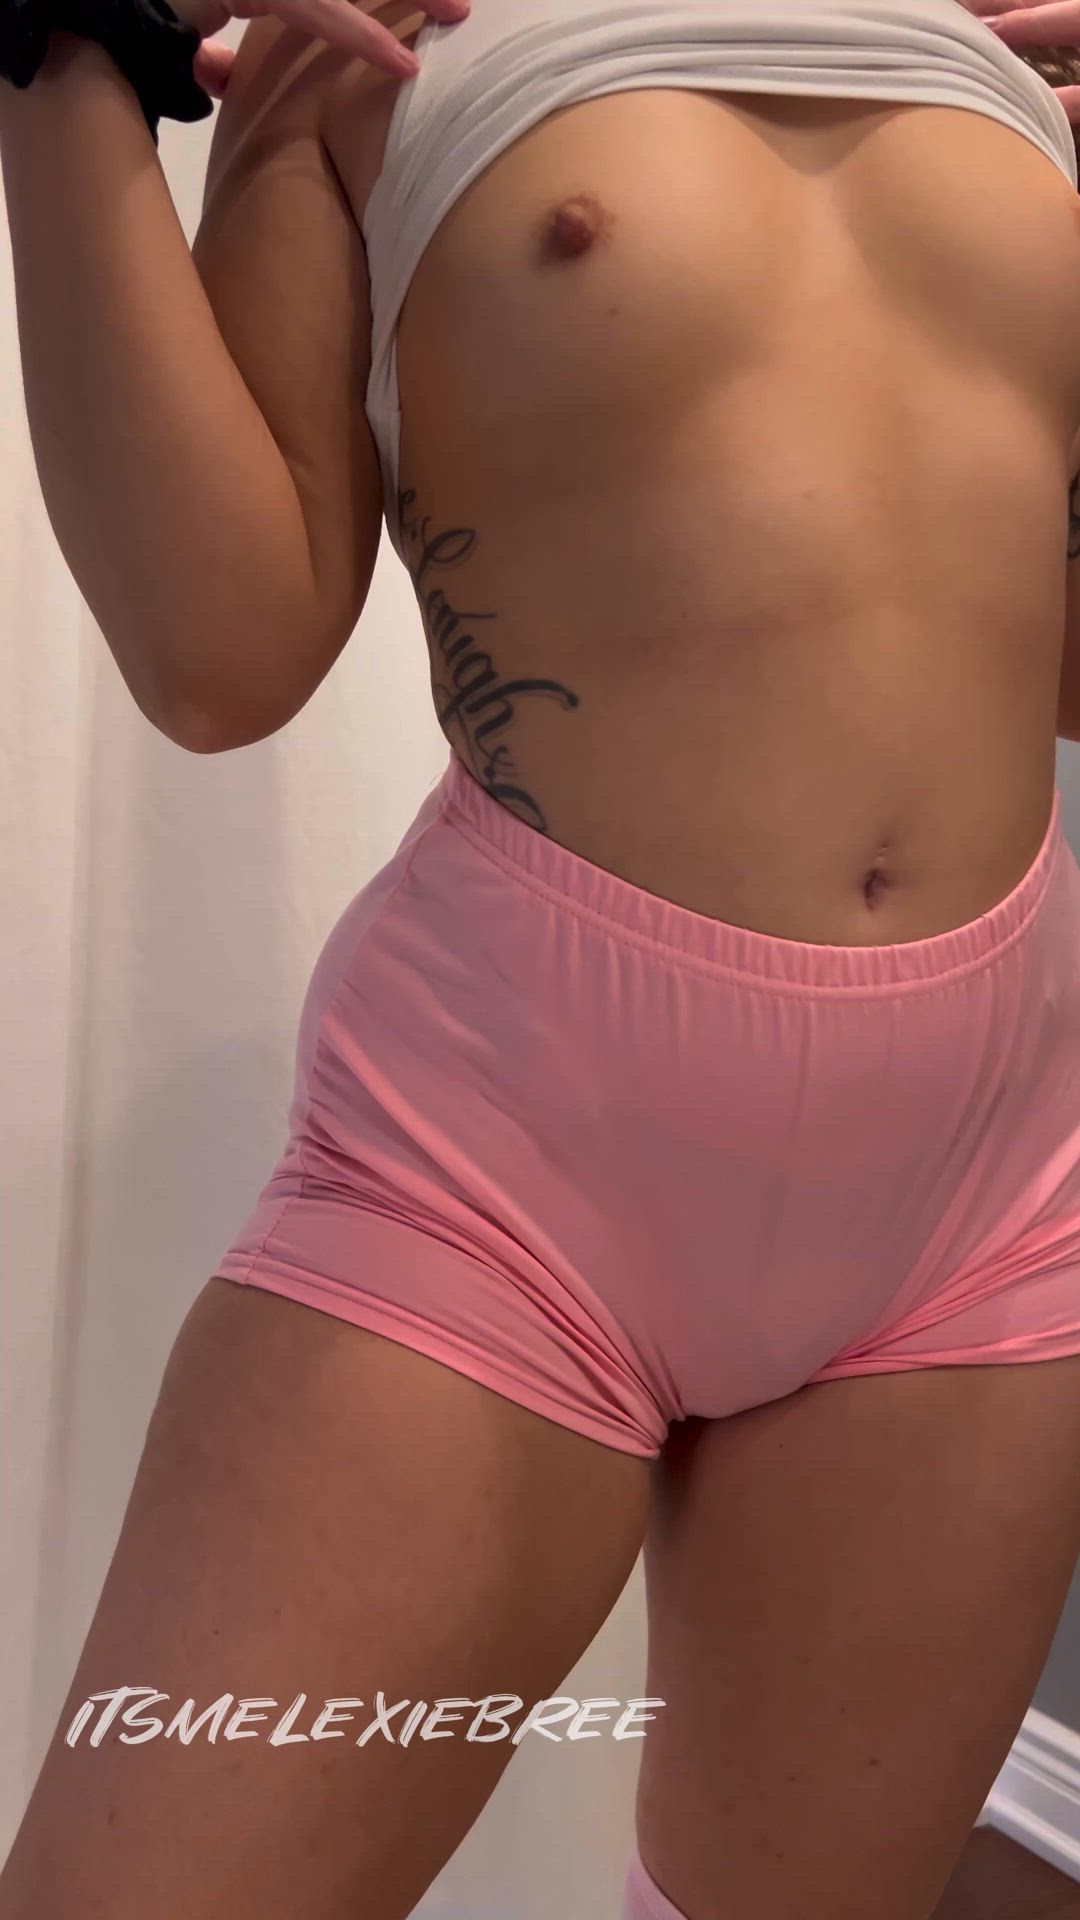 Amateur porn video with onlyfans model itsmelexiebree <strong>@itsmelexiebree</strong>